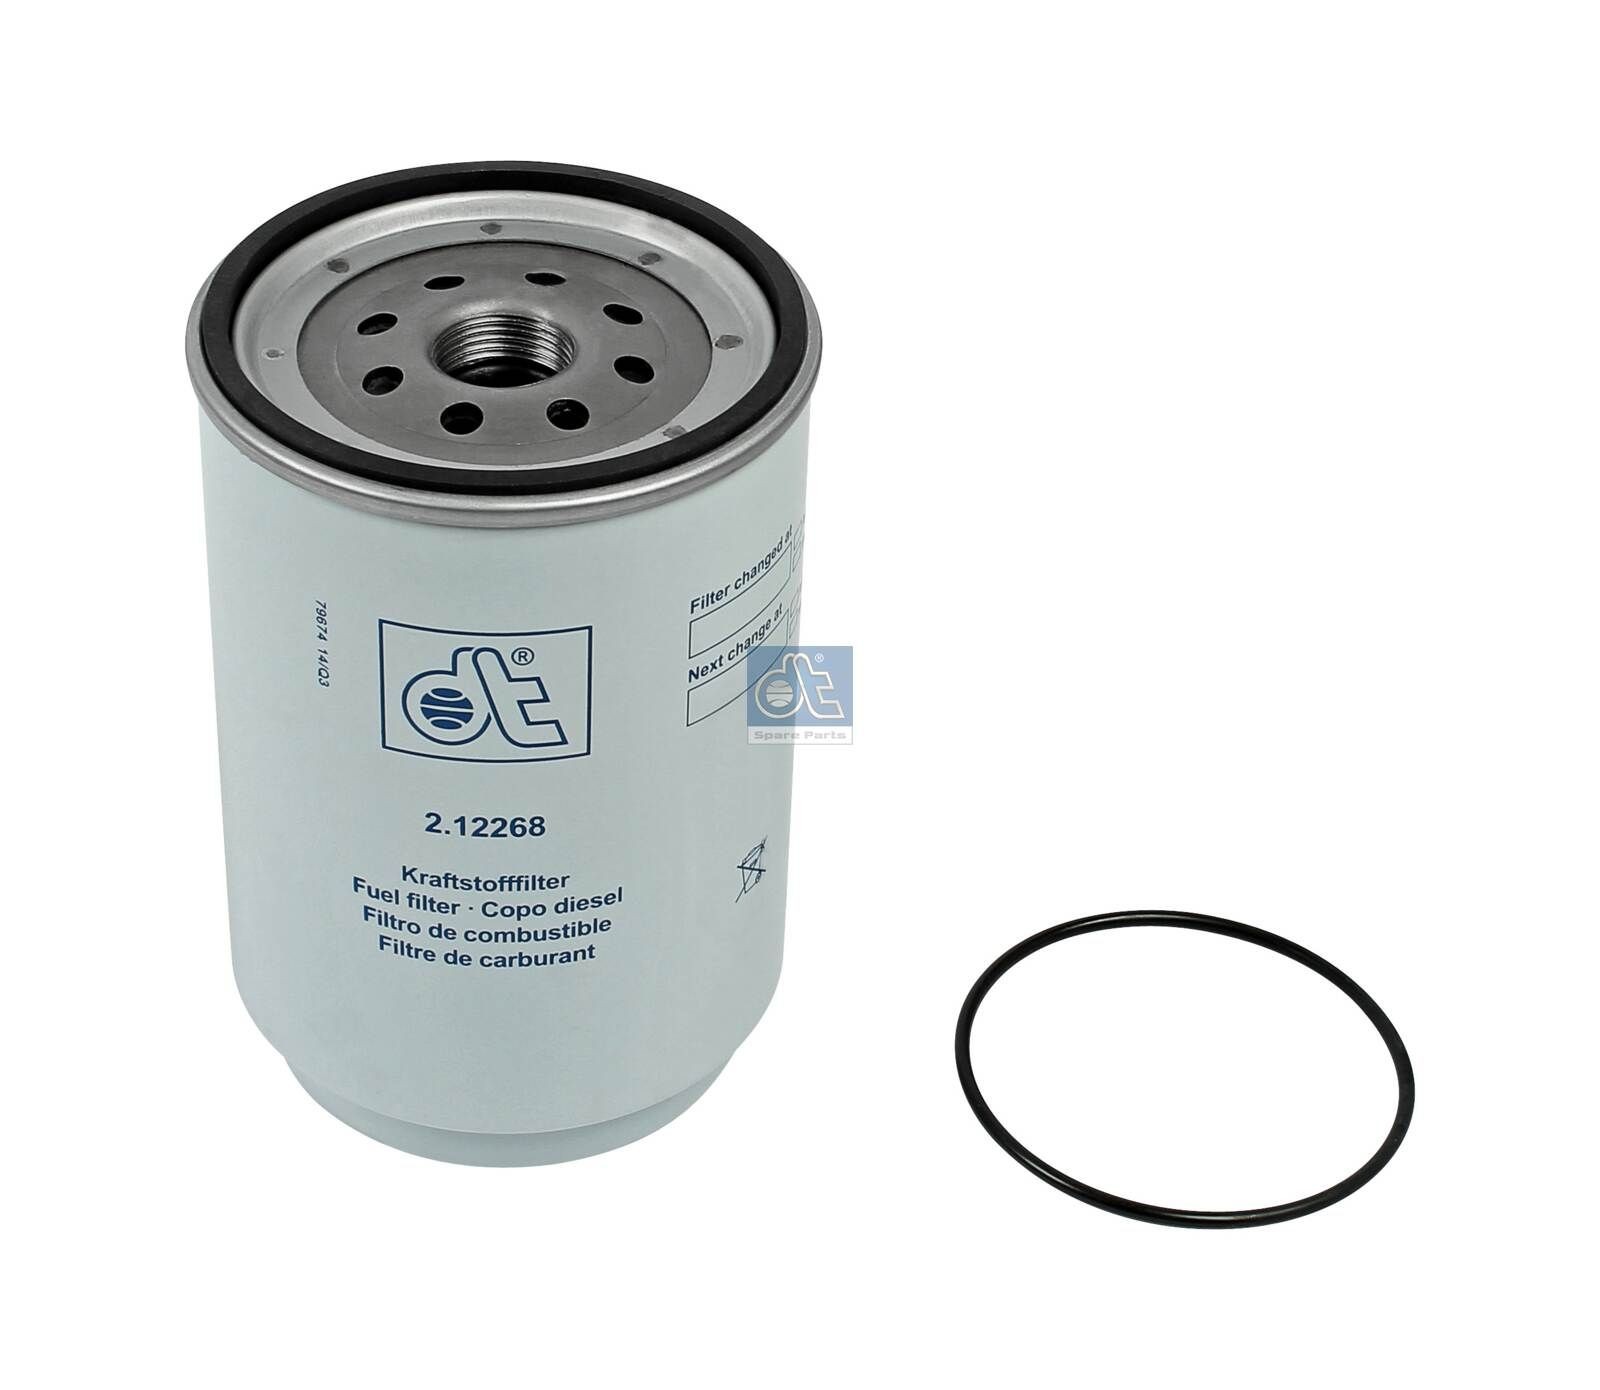 WK 11 001 x DT Spare Parts 2.12268 Fuel filter 5001868493